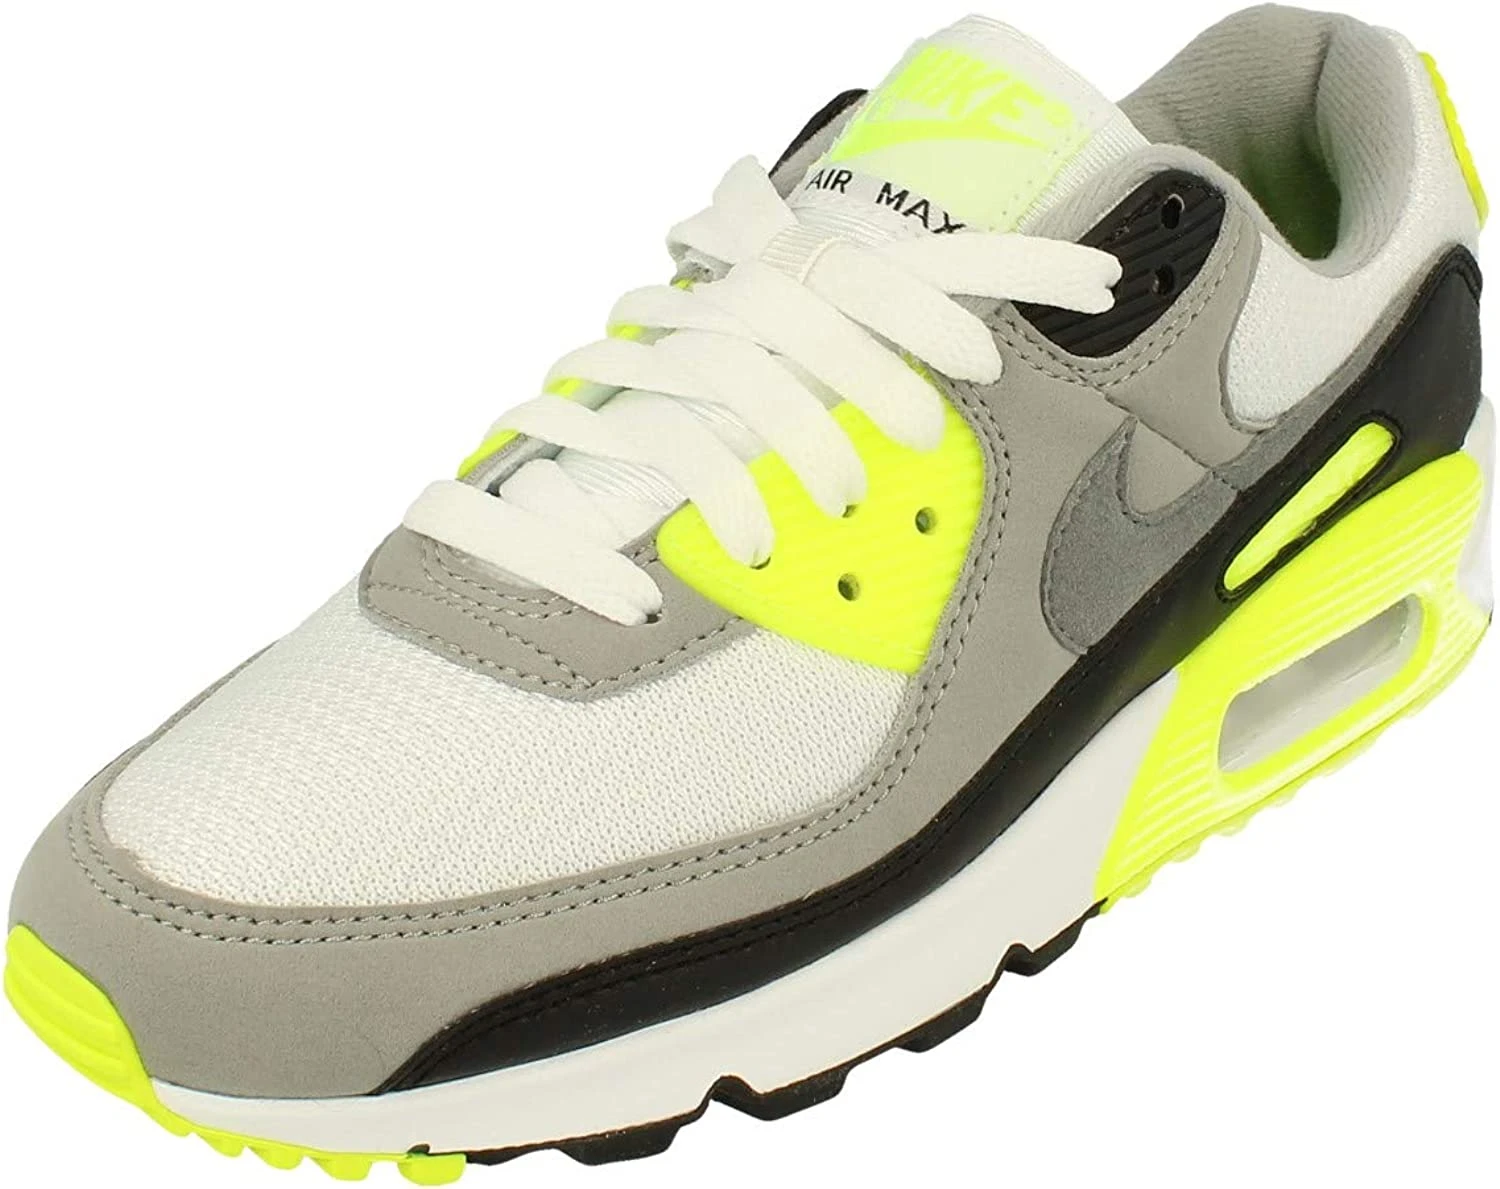 NIKE | Women's Air Max 90 Running Trainers CD0490 Sneakers Shoes,商家EnRoute Global,价格¥748